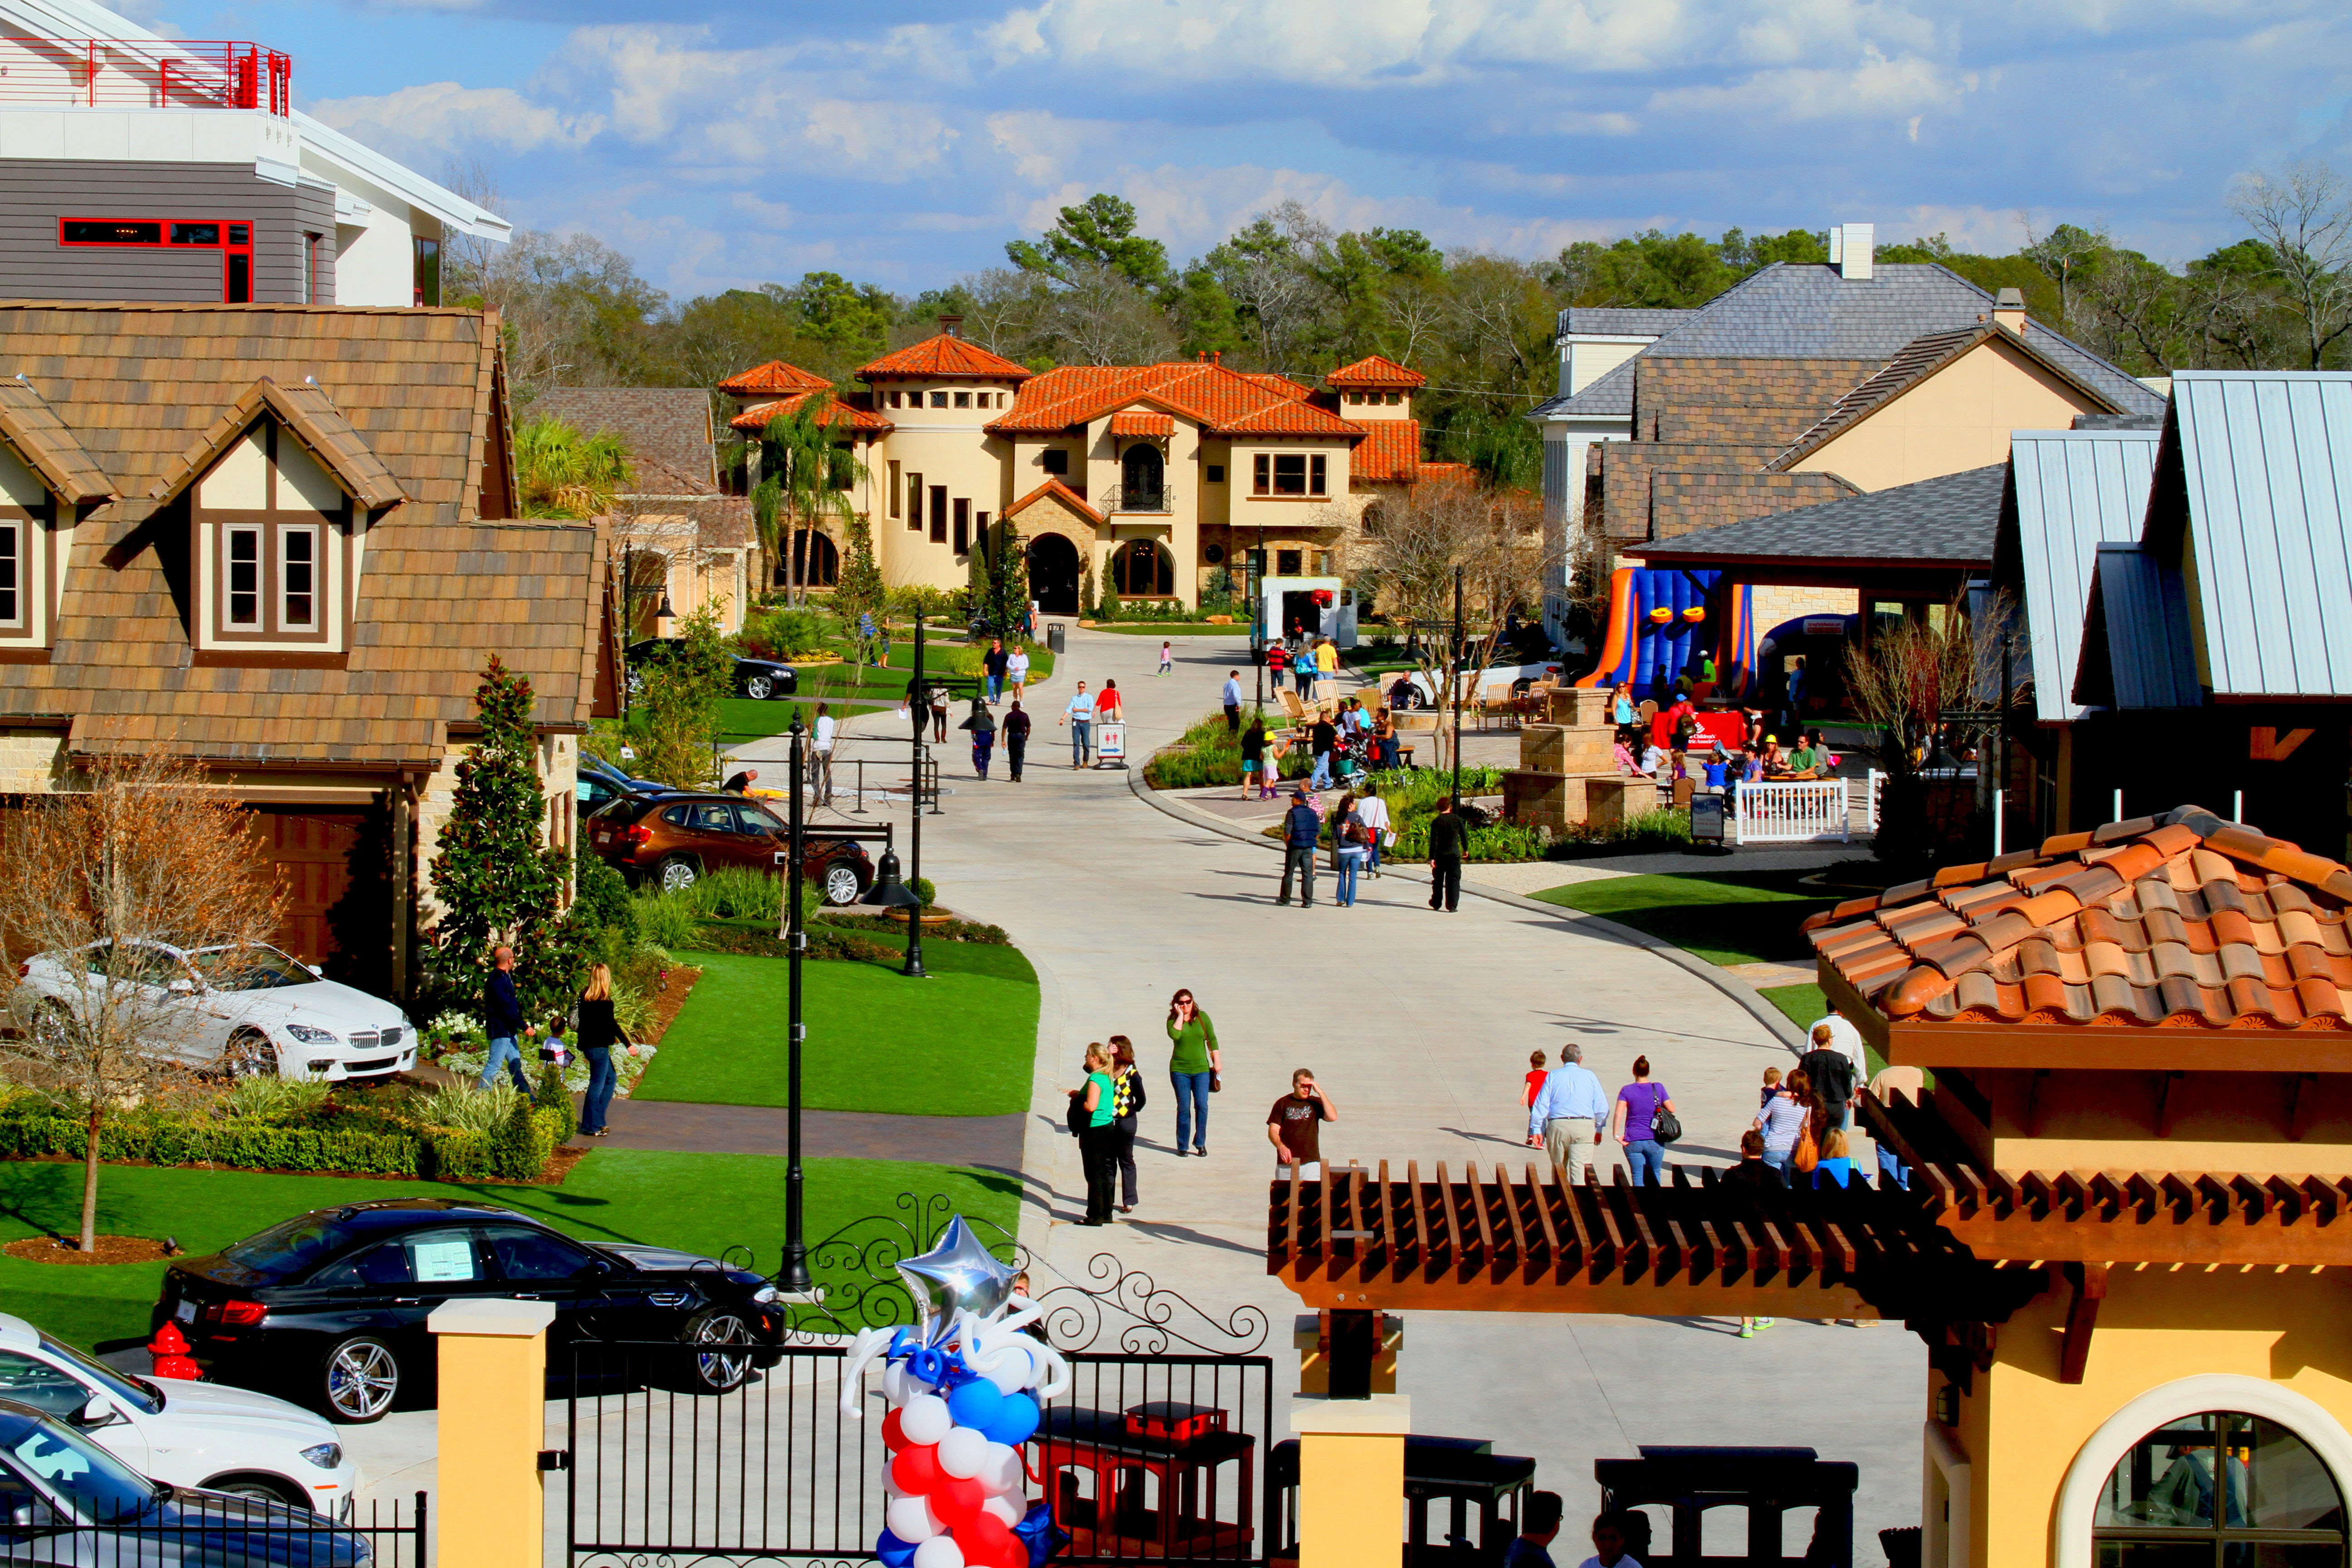 MainStreet America is a year round, home demonstration park